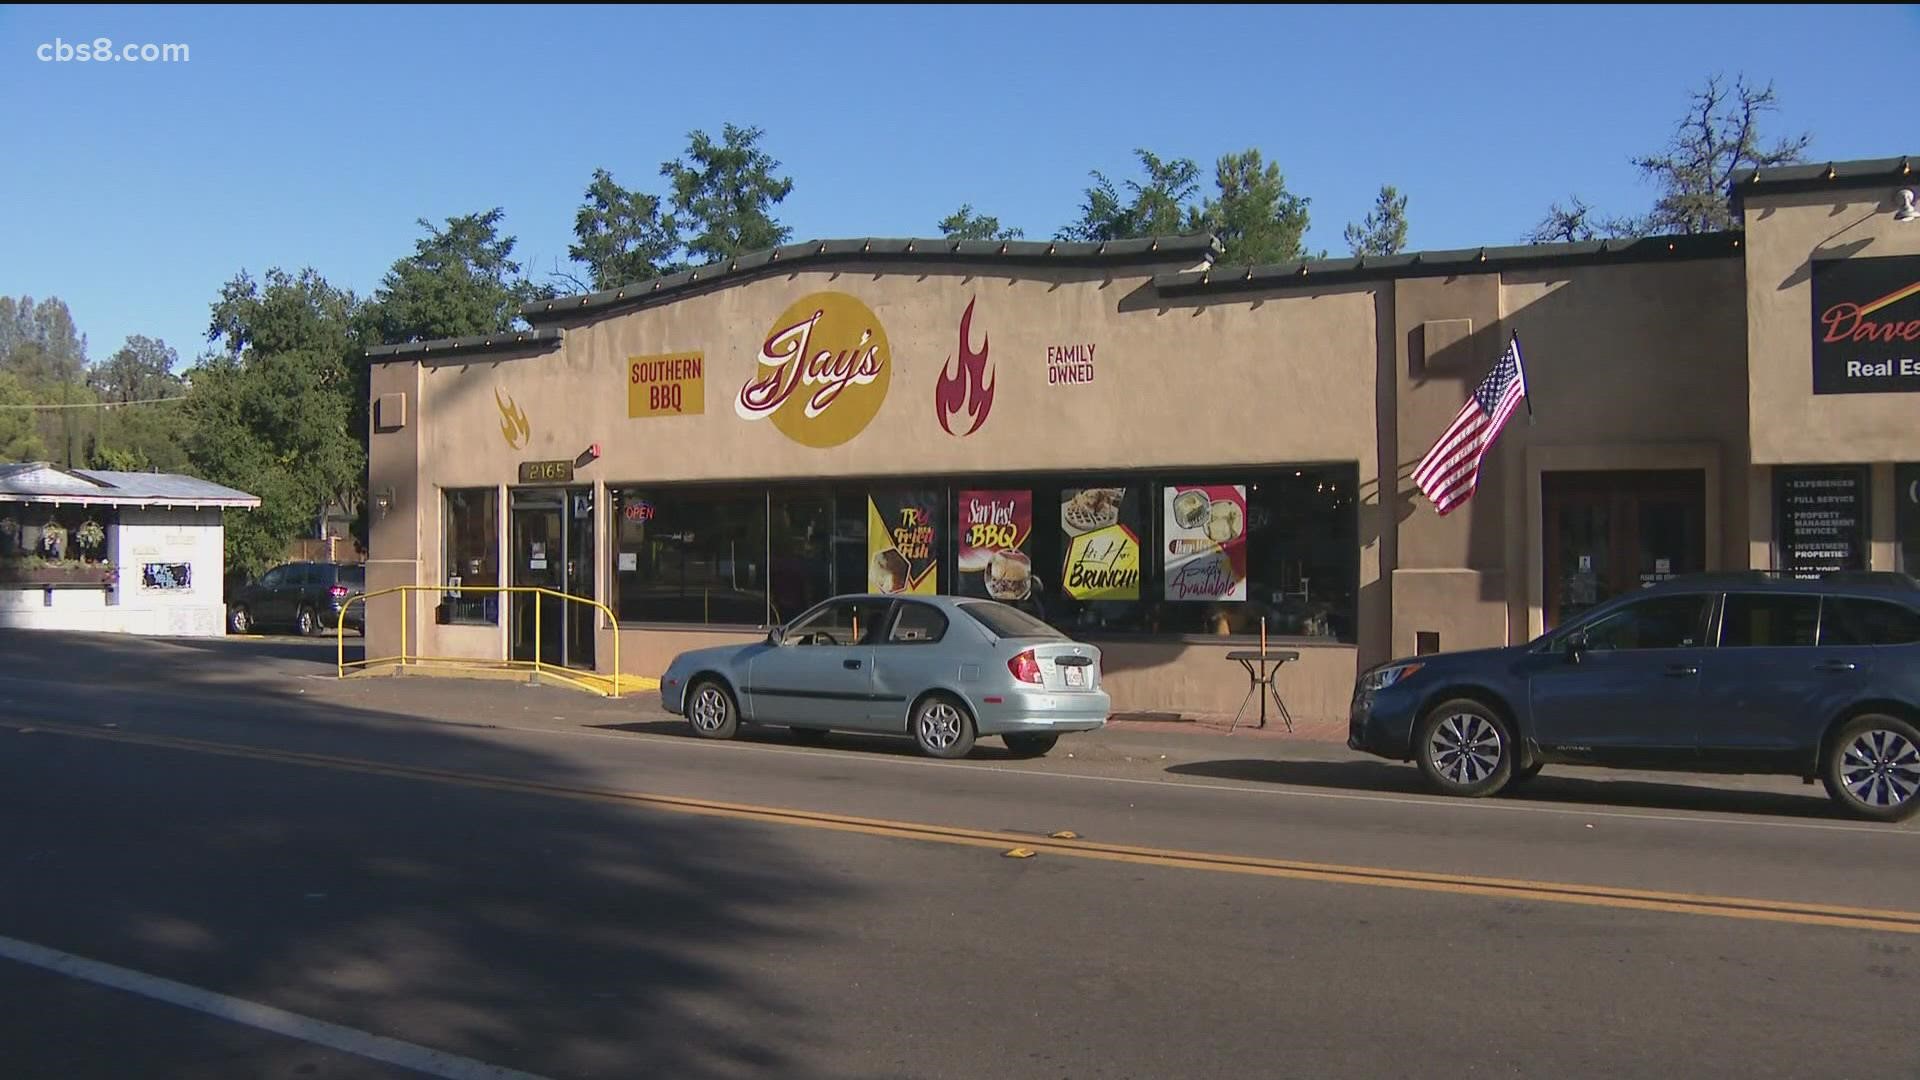 The family-owned business closed for a day on Friday, to regroup.